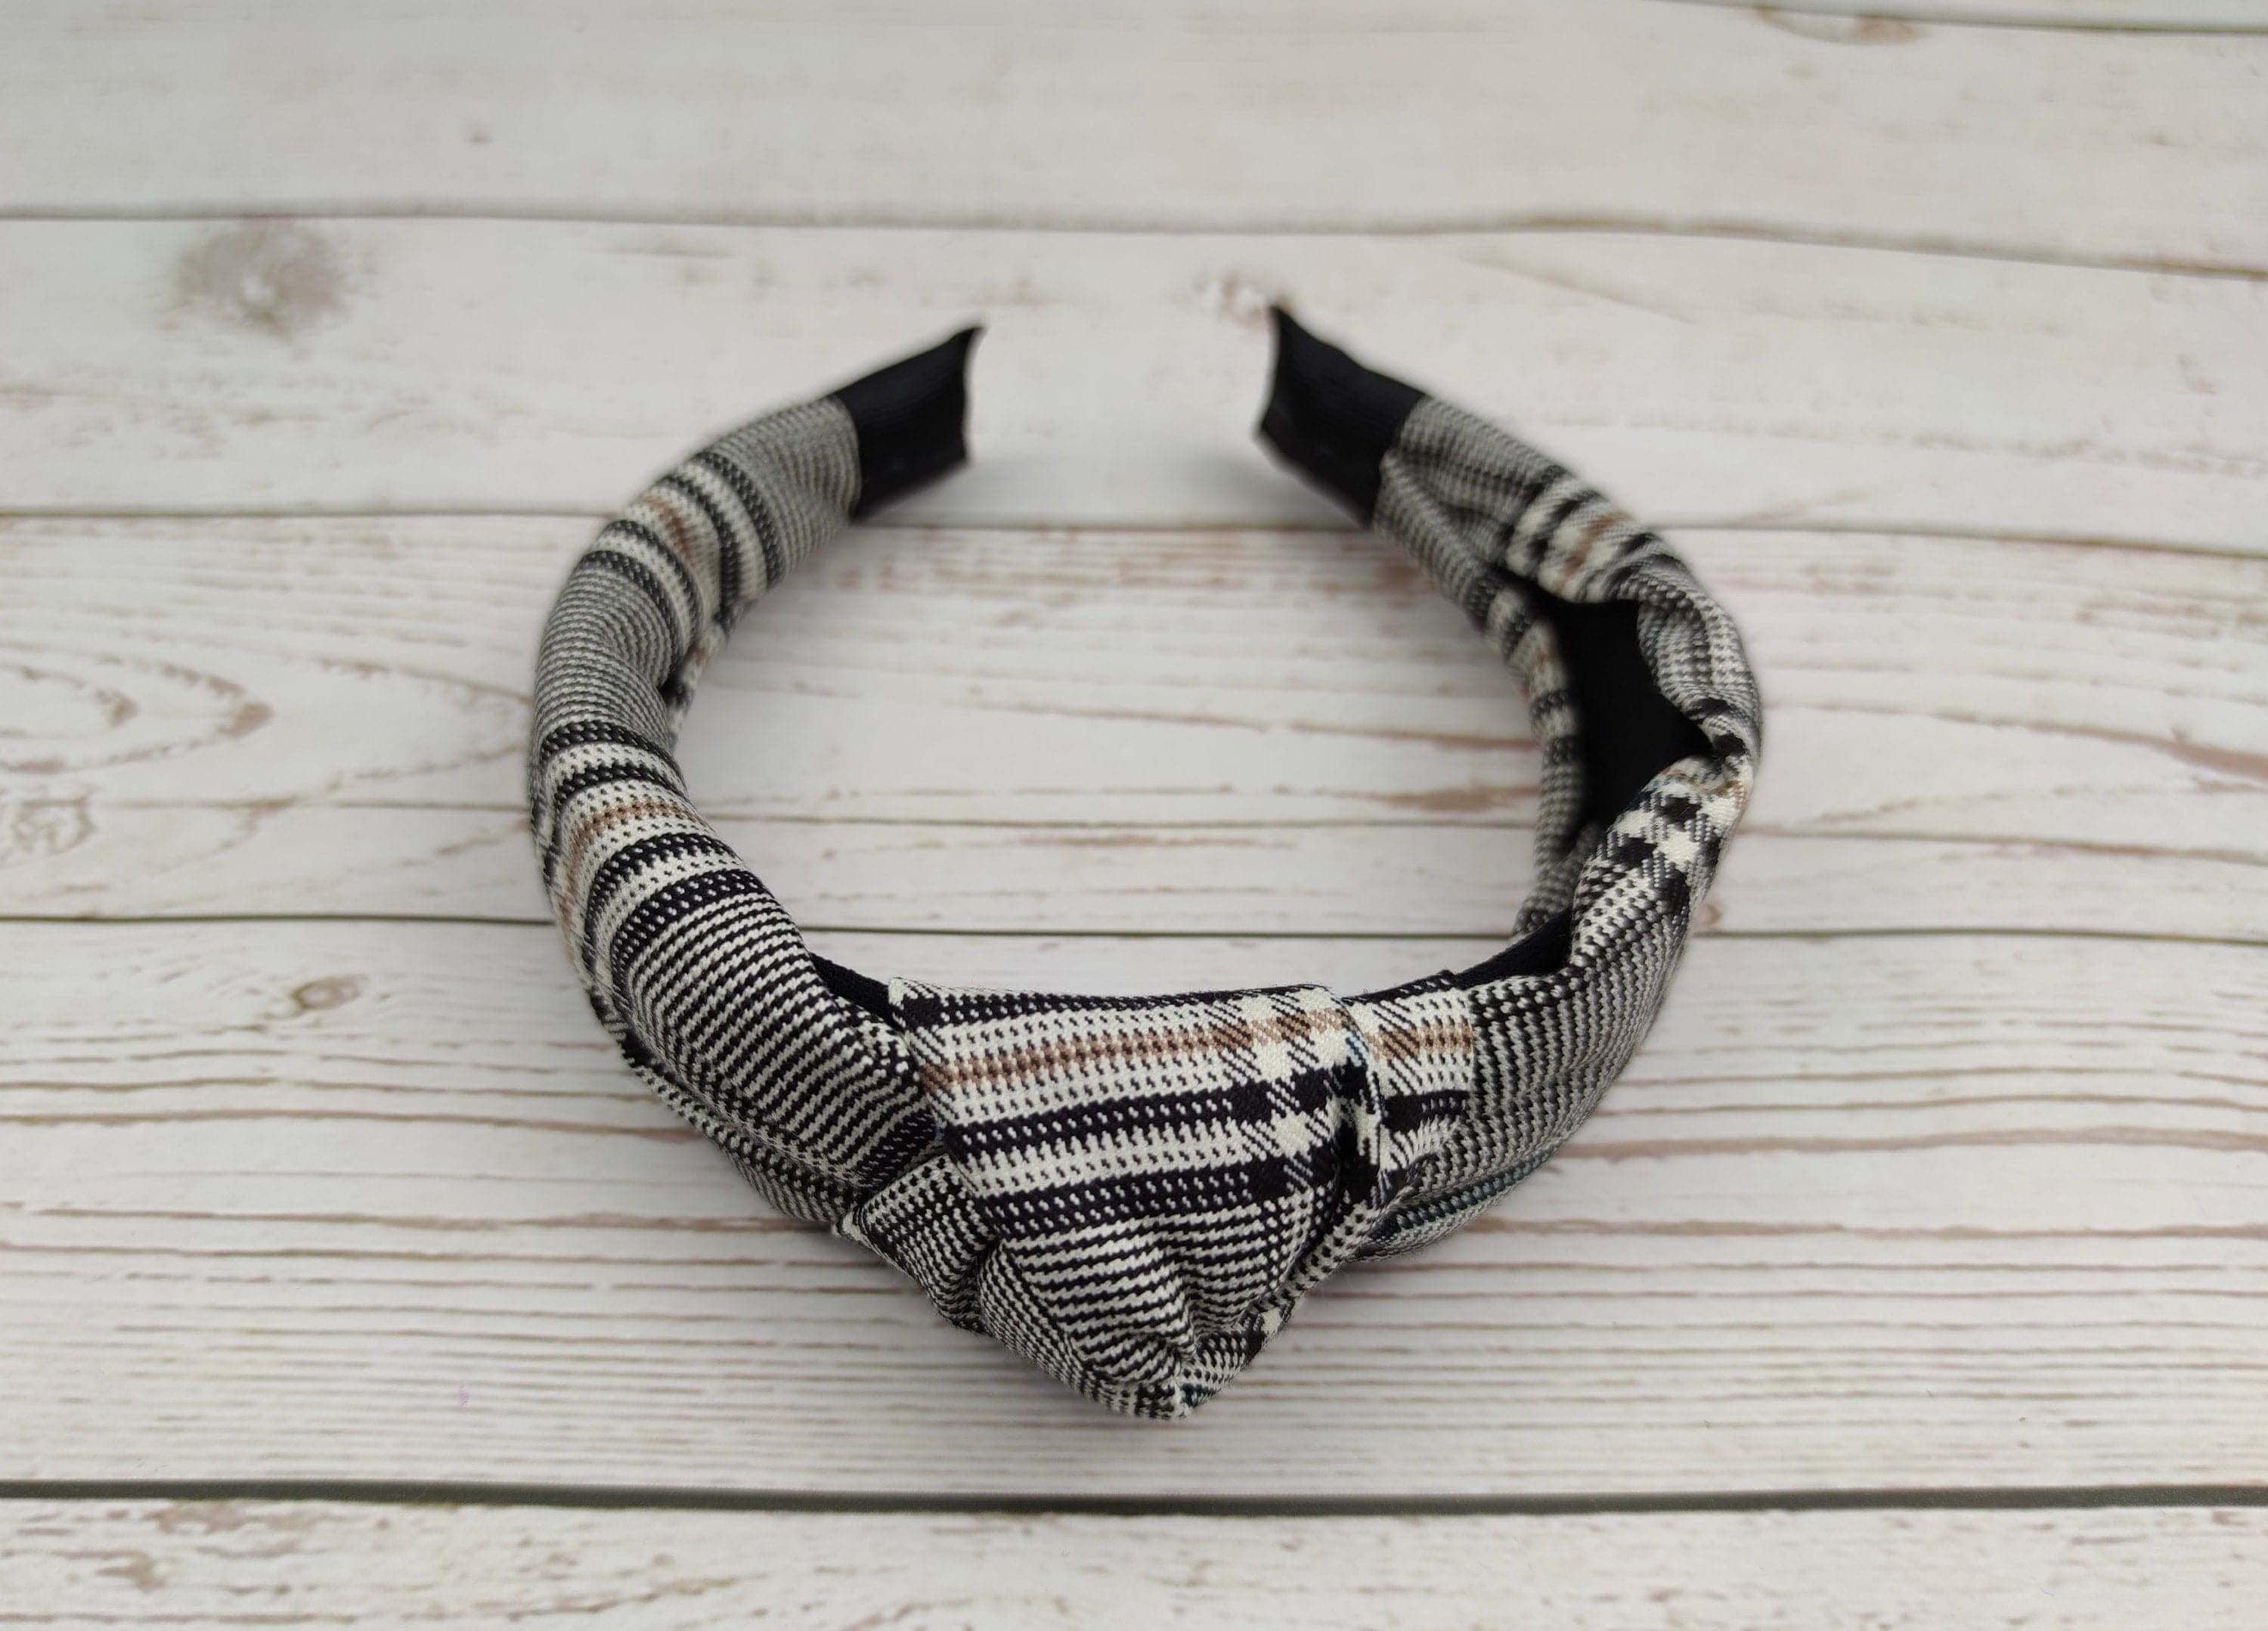 Charming Chic and Versatile Crepe Headband - Perfect for College Girls! White and Black Striped Knotted Headband, Ideal for any Outfit available at Moyoni Design